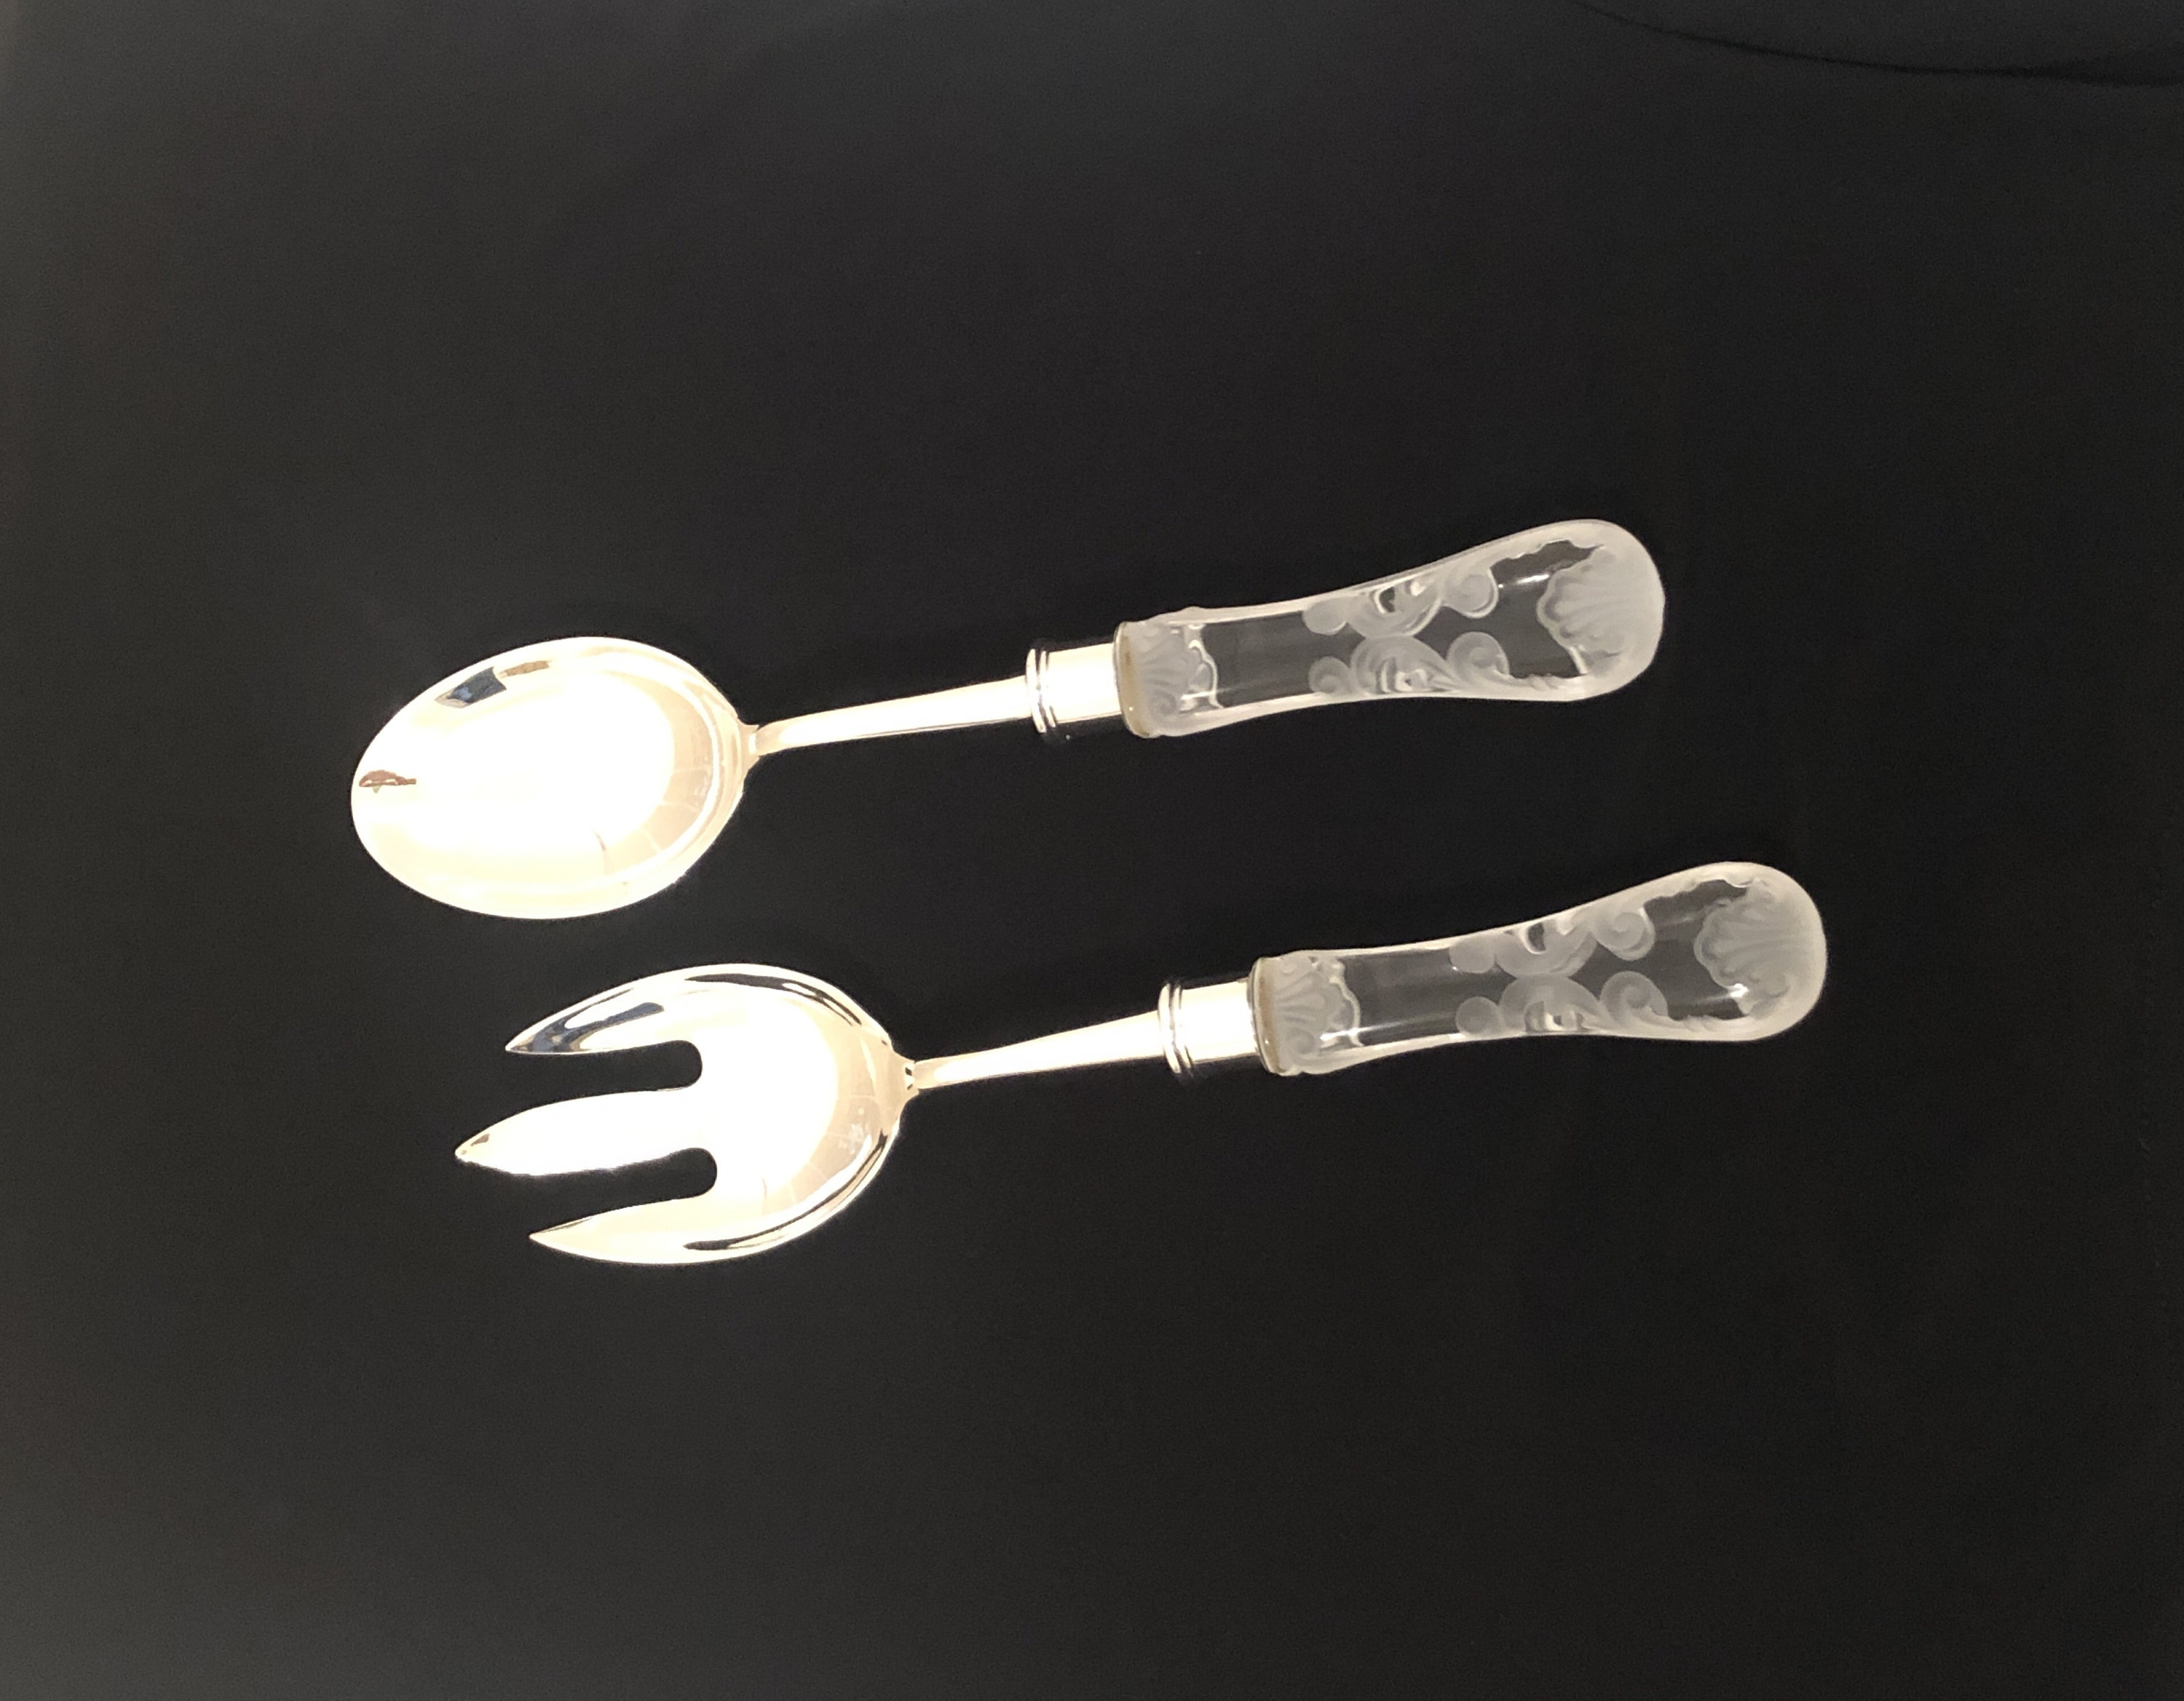 SteamBowl with Fork+Spoon Bundle